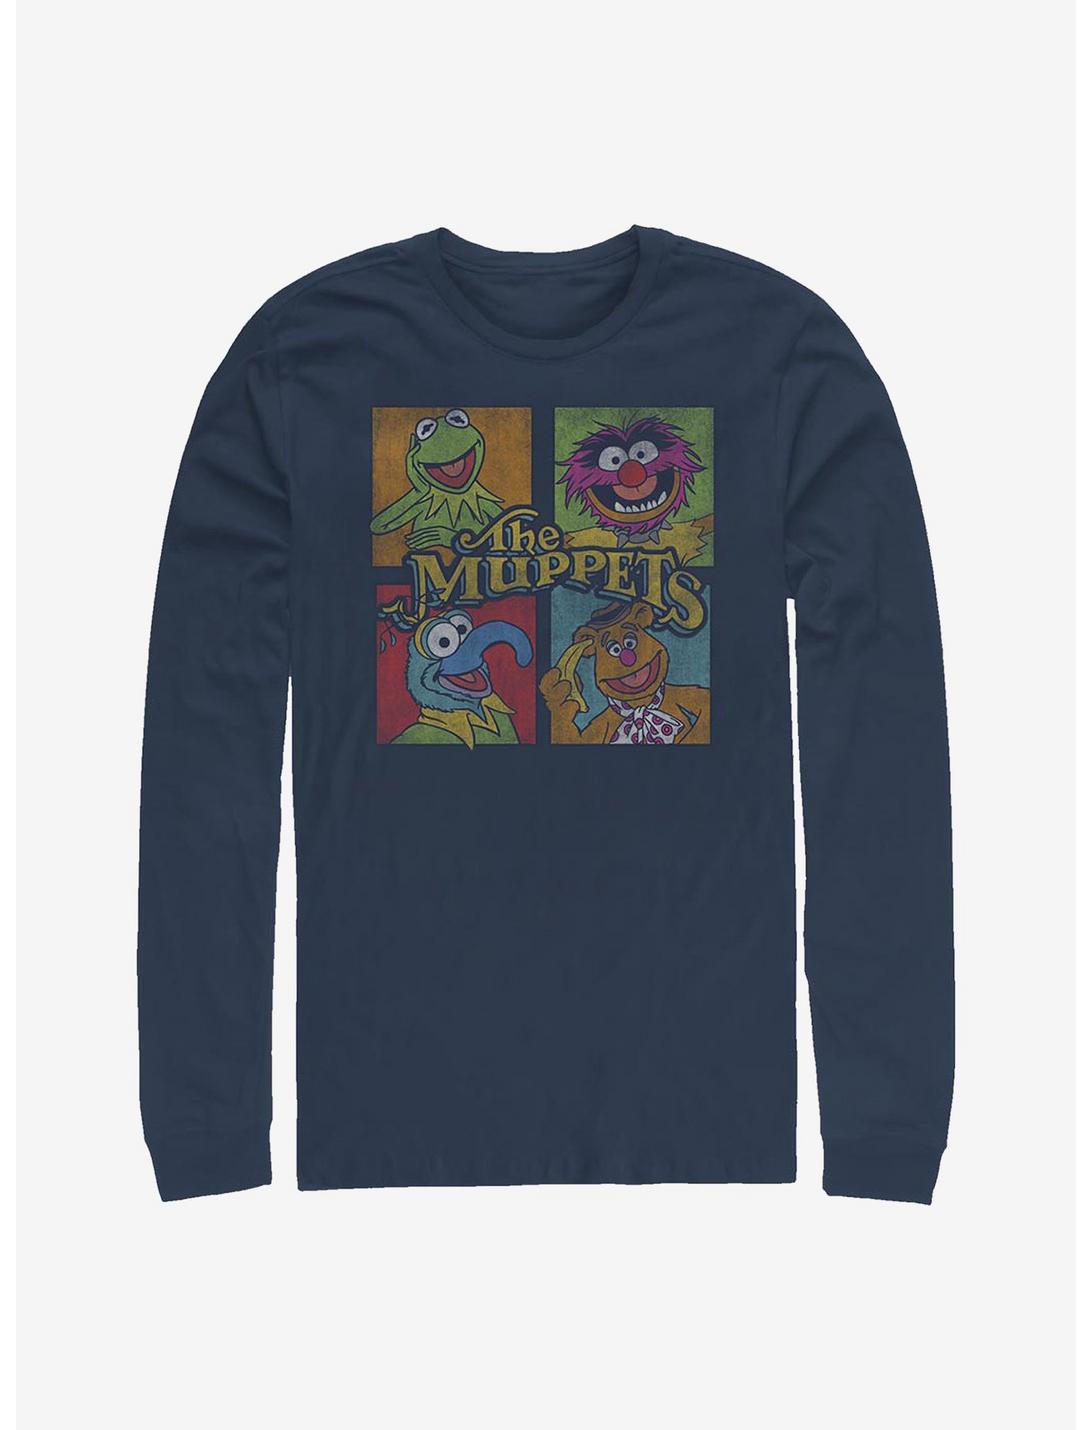 Disney The Muppets Square Long-Sleeve T-Shirt, NAVY, hi-res